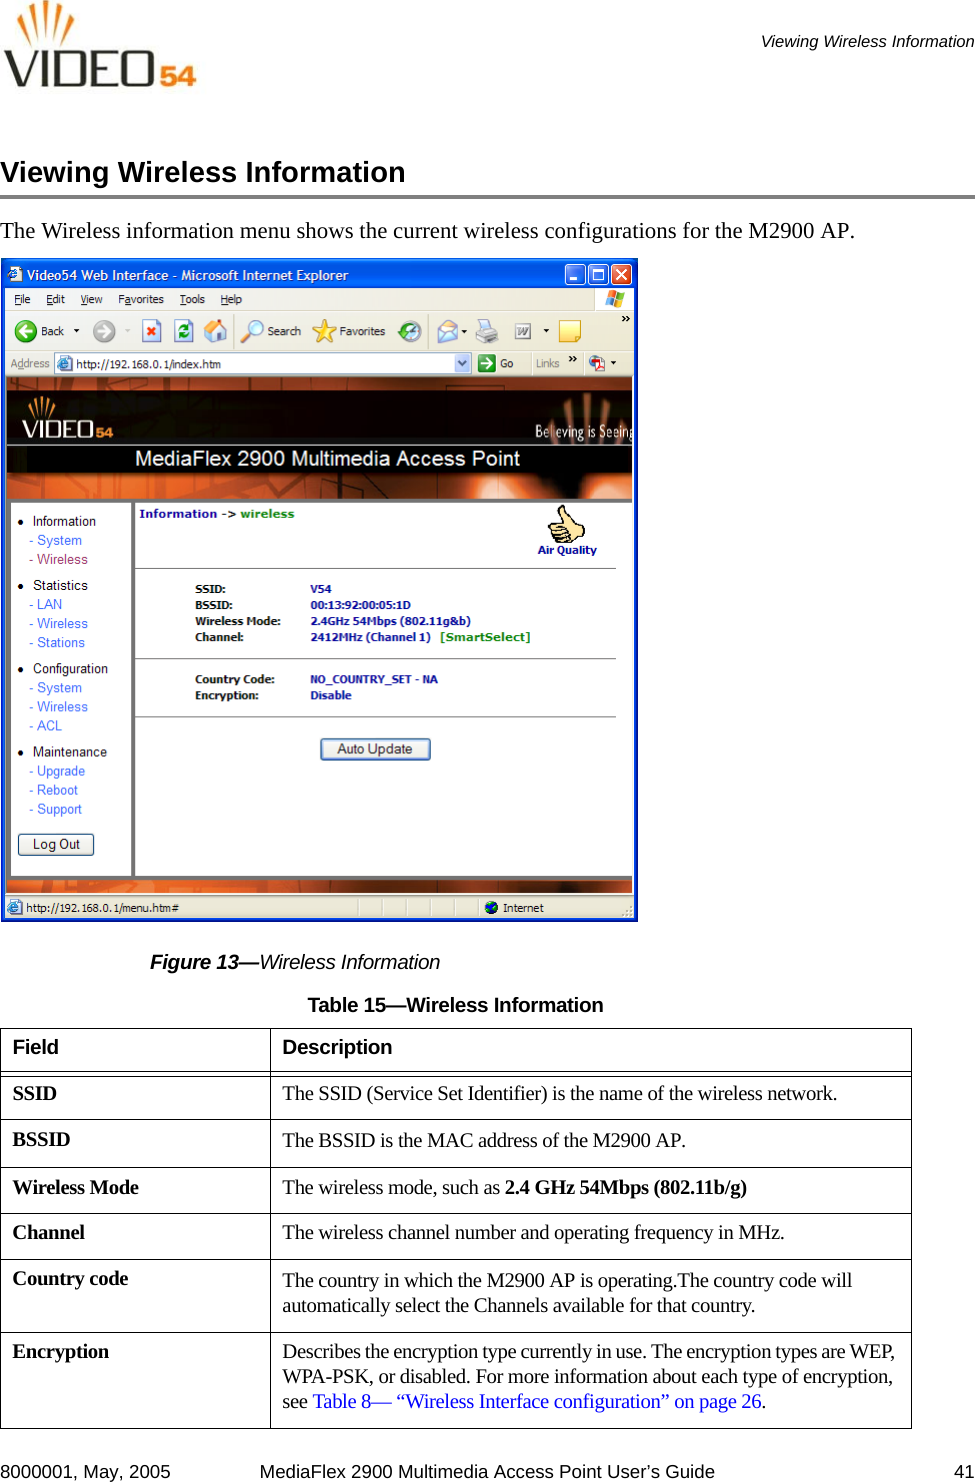 8000001, May, 2005 MediaFlex 2900 Multimedia Access Point User’s Guide 41Viewing Wireless InformationViewing Wireless InformationThe Wireless information menu shows the current wireless configurations for the M2900 AP.Figure 13—Wireless InformationTable 15—Wireless InformationField DescriptionSSID The SSID (Service Set Identifier) is the name of the wireless network. BSSID The BSSID is the MAC address of the M2900 AP.Wireless Mode The wireless mode, such as 2.4 GHz 54Mbps (802.11b/g)Channel The wireless channel number and operating frequency in MHz.Country code The country in which the M2900 AP is operating.The country code will automatically select the Channels available for that country.Encryption Describes the encryption type currently in use. The encryption types are WEP, WPA-PSK, or disabled. For more information about each type of encryption, see Table 8— “Wireless Interface configuration” on page 26.